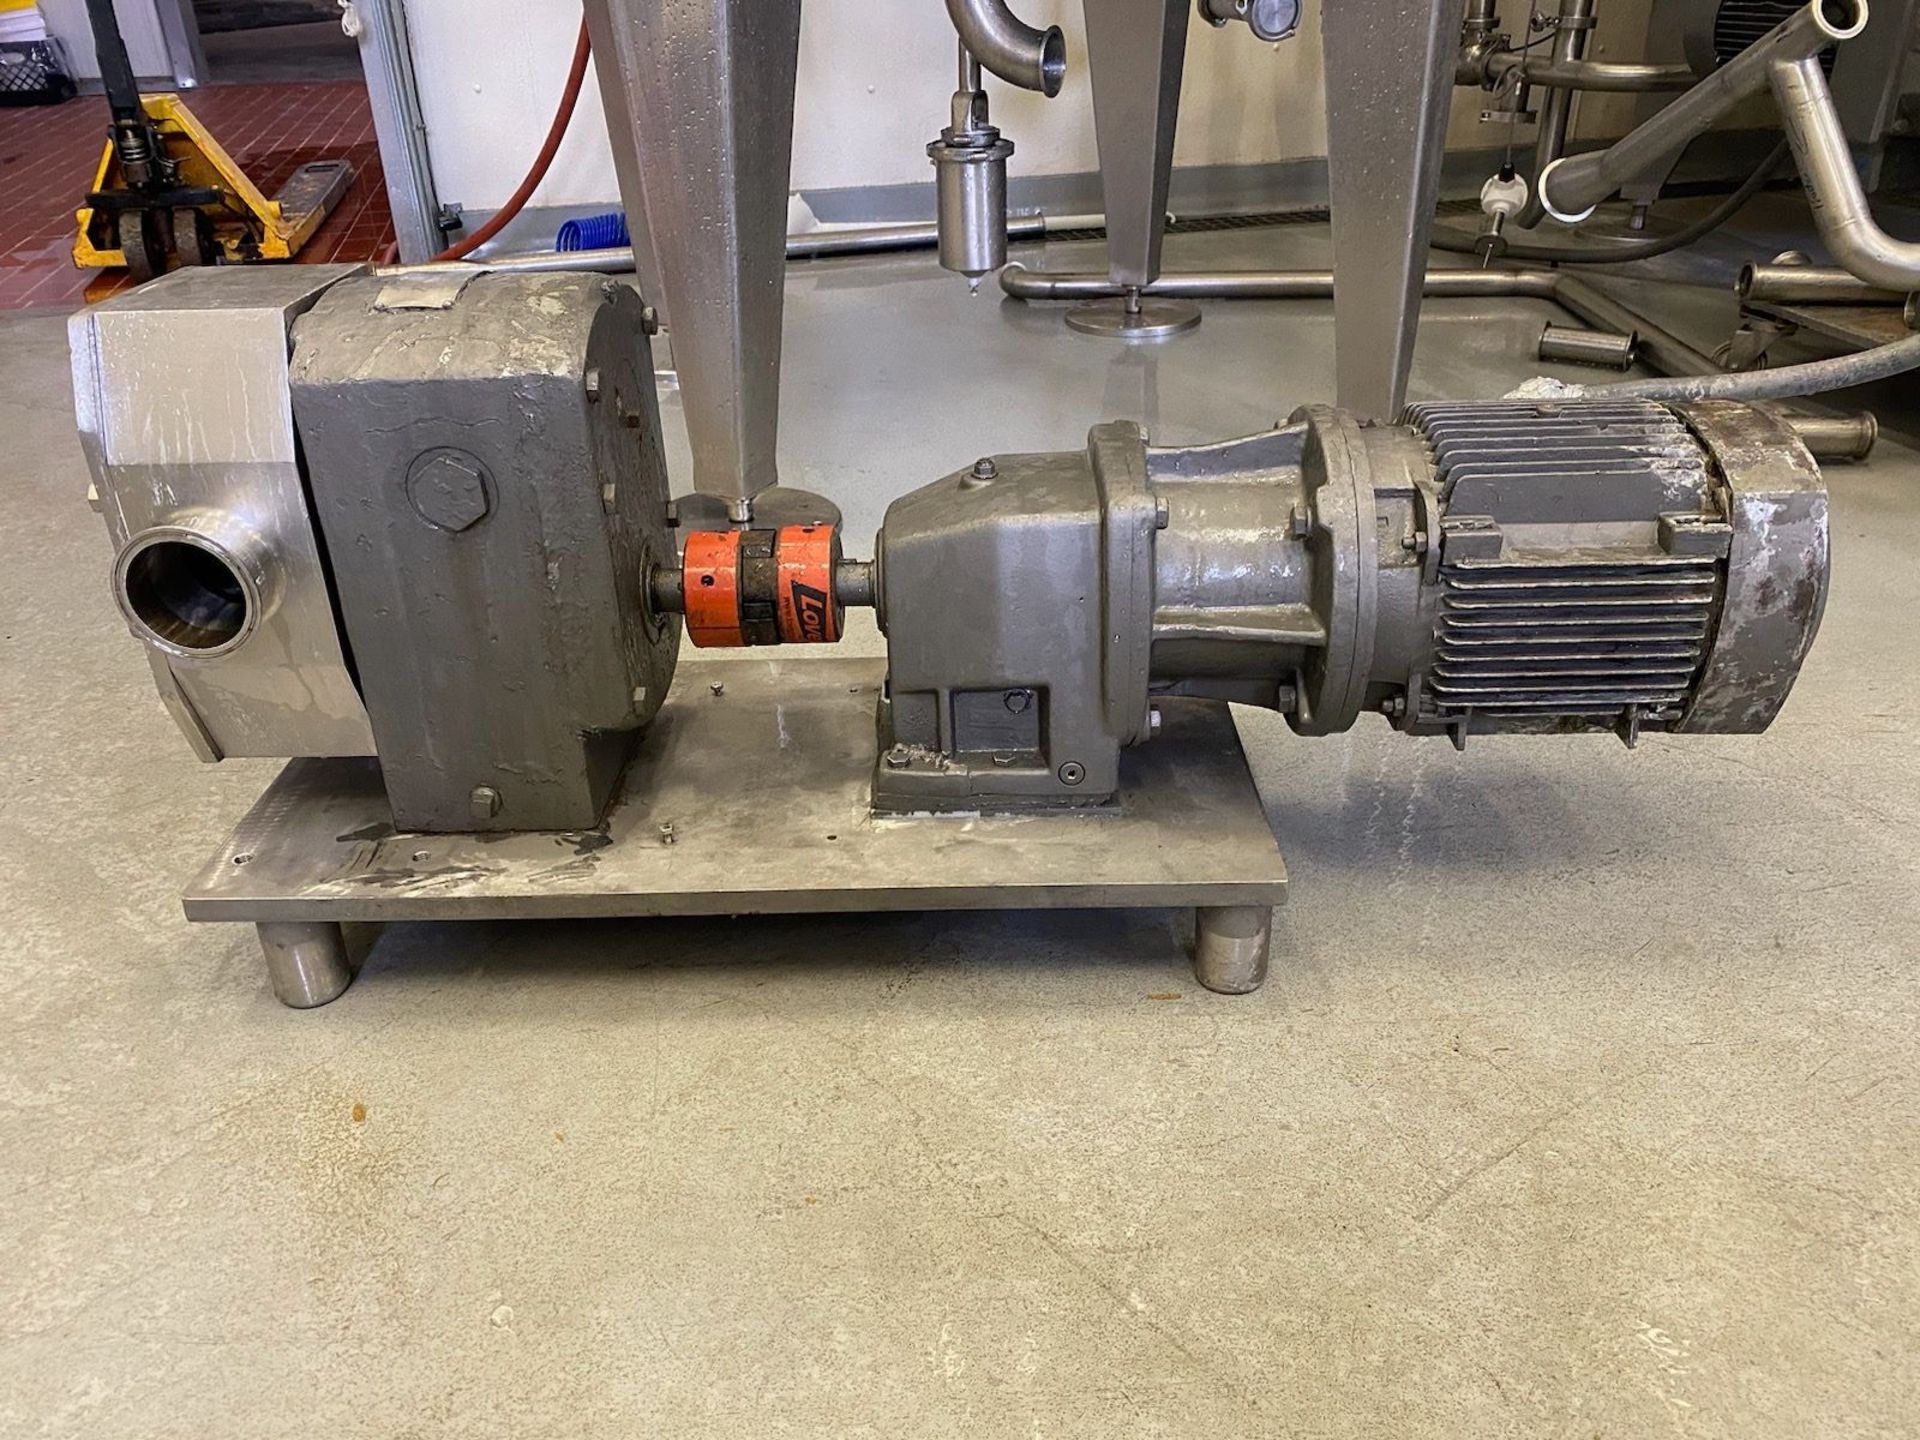 Positive Pump: INLET 2 1/2"; OUTLET 2 1/2"; 230V /460 (Loading Fee $100) (Located Dixon, IL)